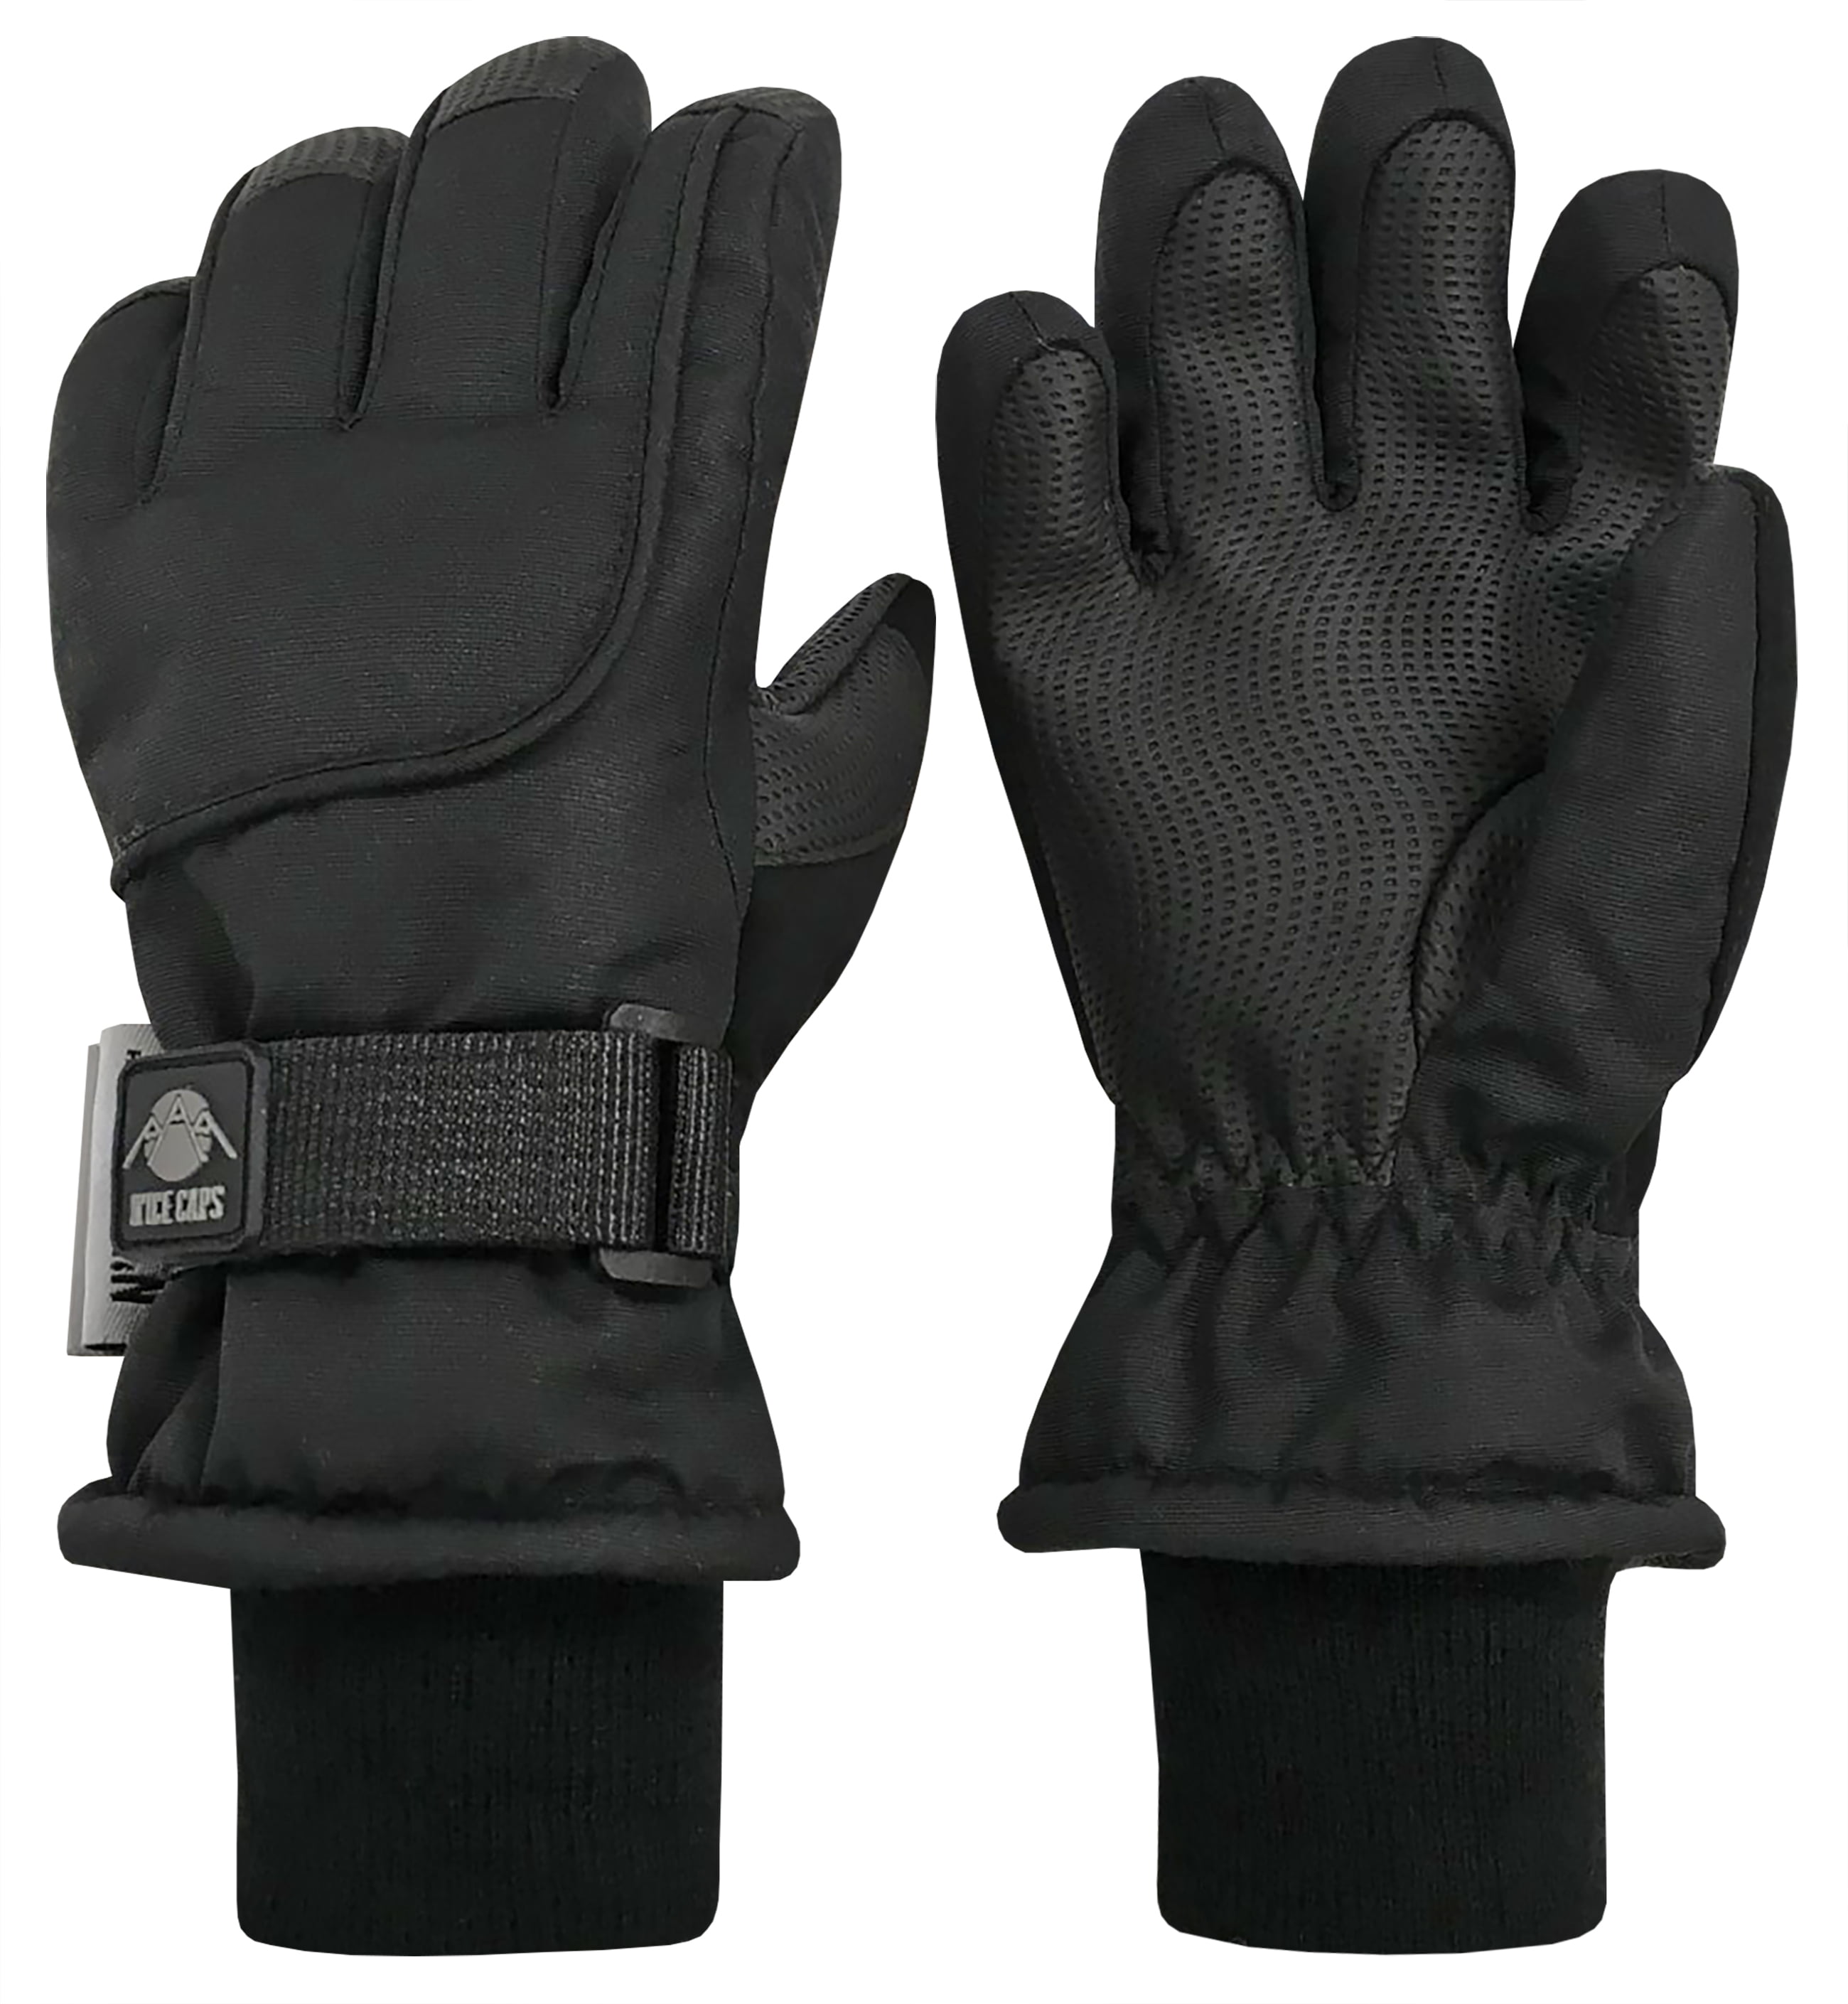 Unisex Winter Thinsulate Gloves-Waterproof & Windproof for Skiing & Photography 